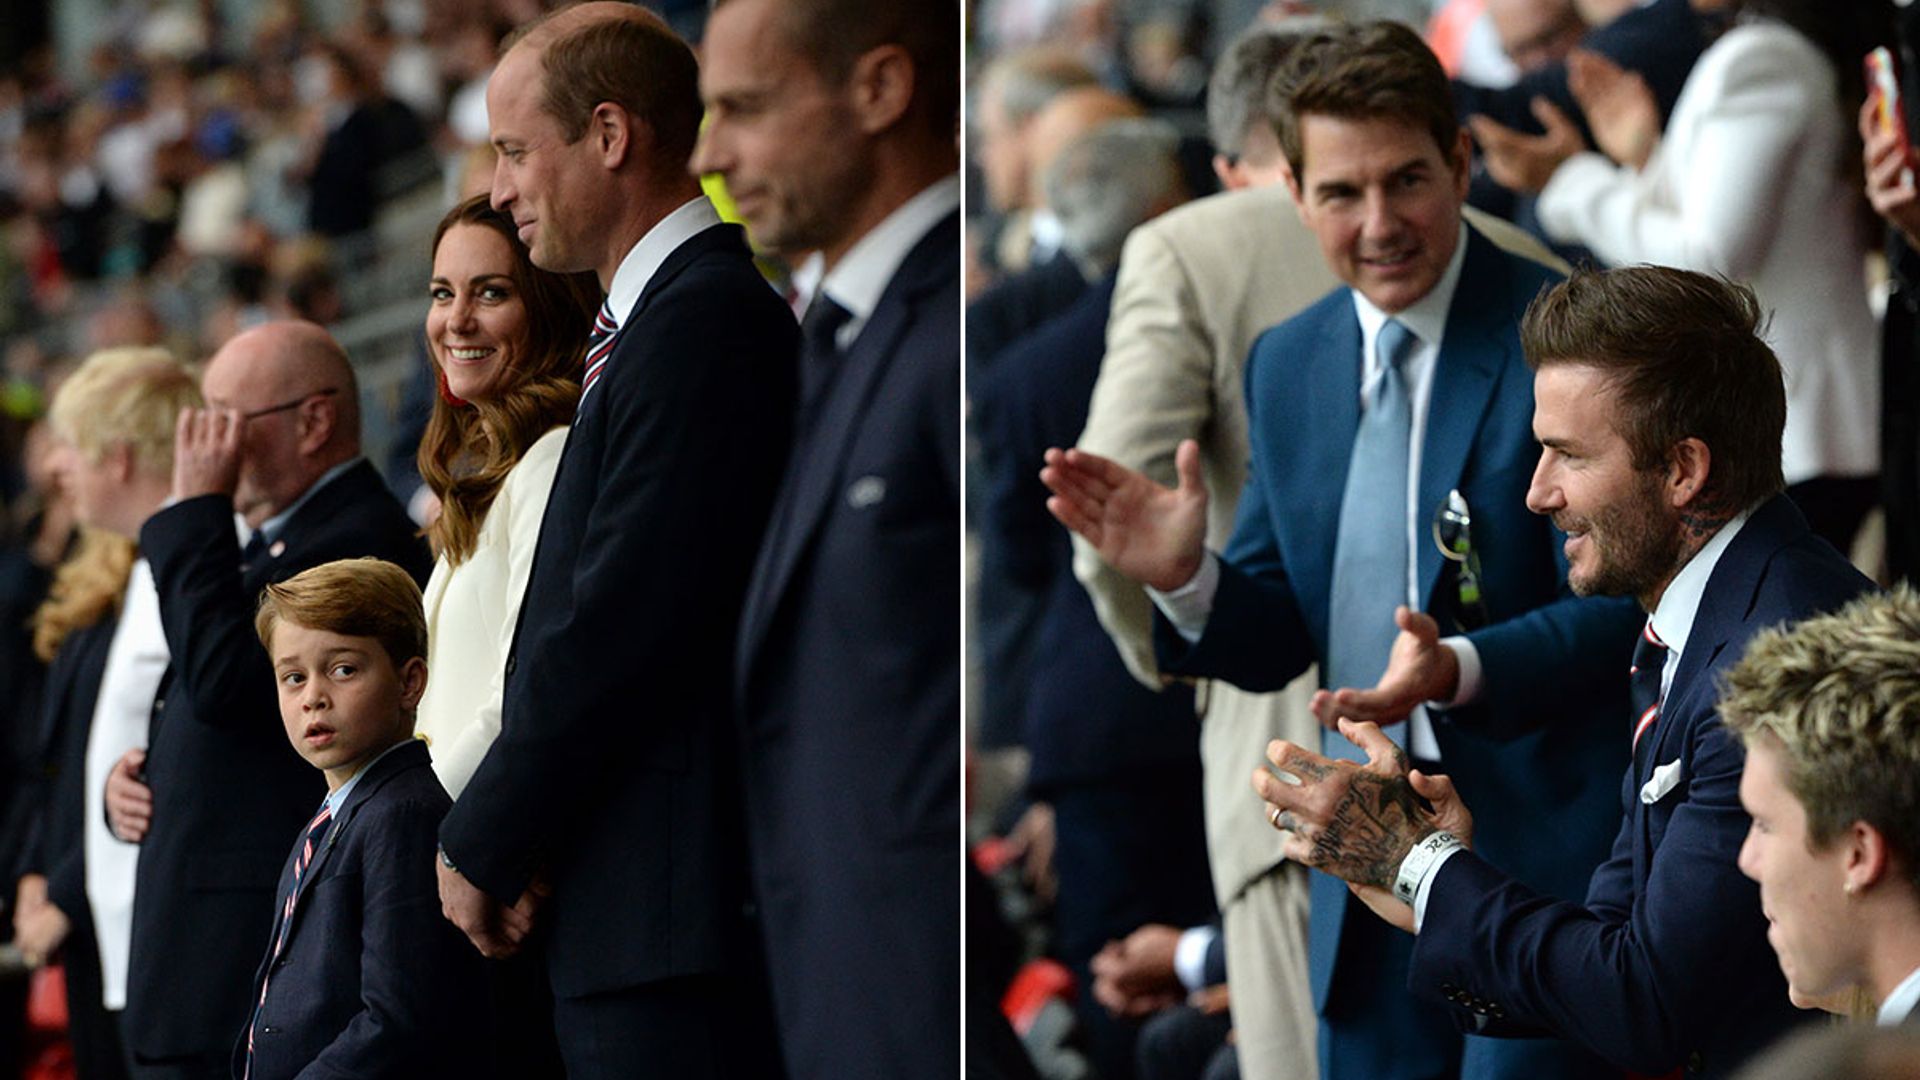 Kate Middleton and Prince George's behind-the-scenes video with Tom Cruise shows just how relatable the royals are